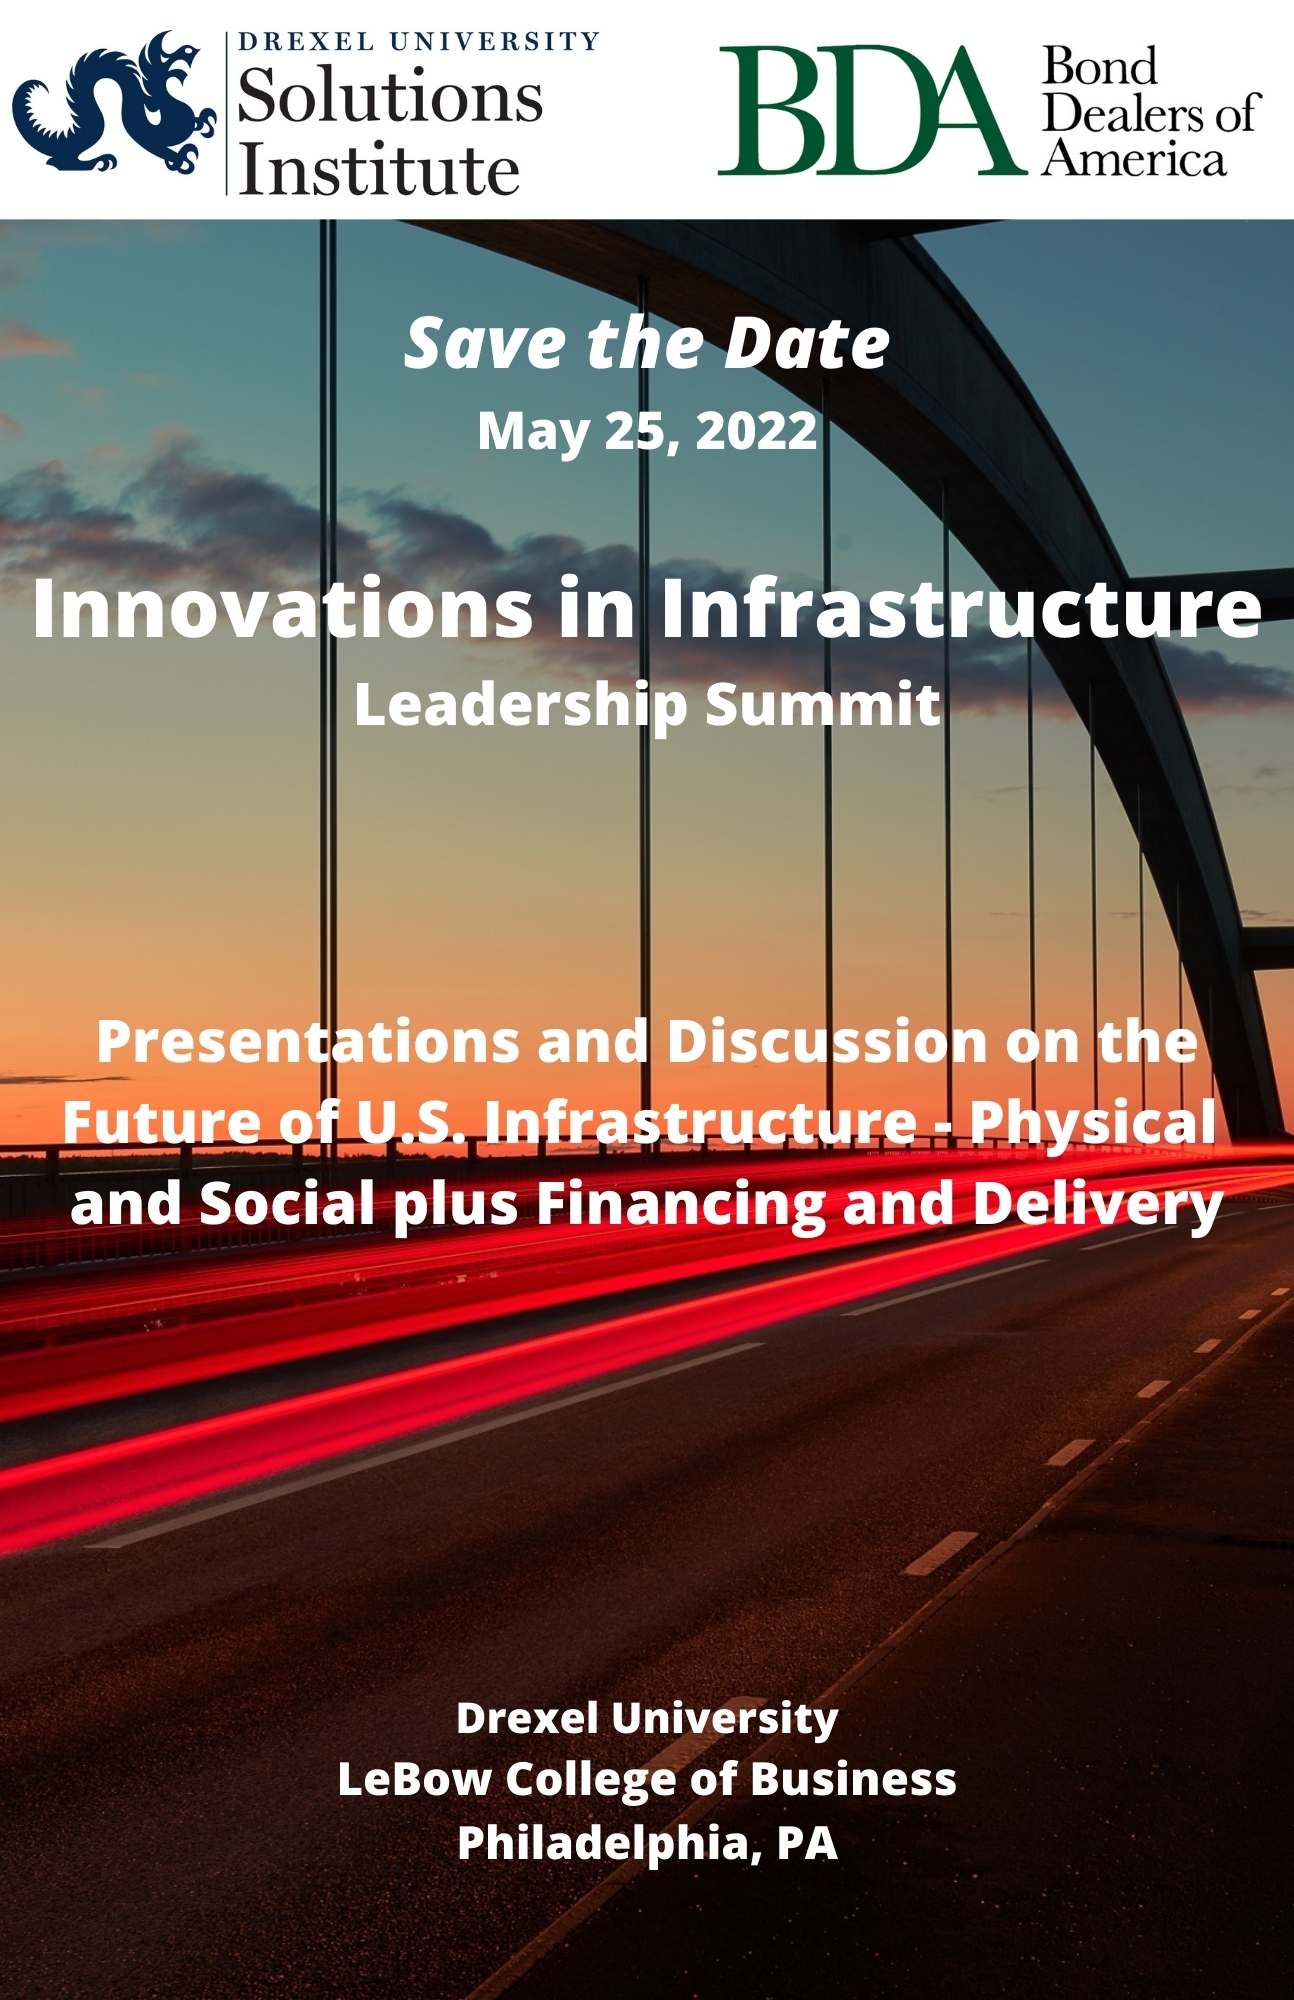 Innovations in Infrastructure event